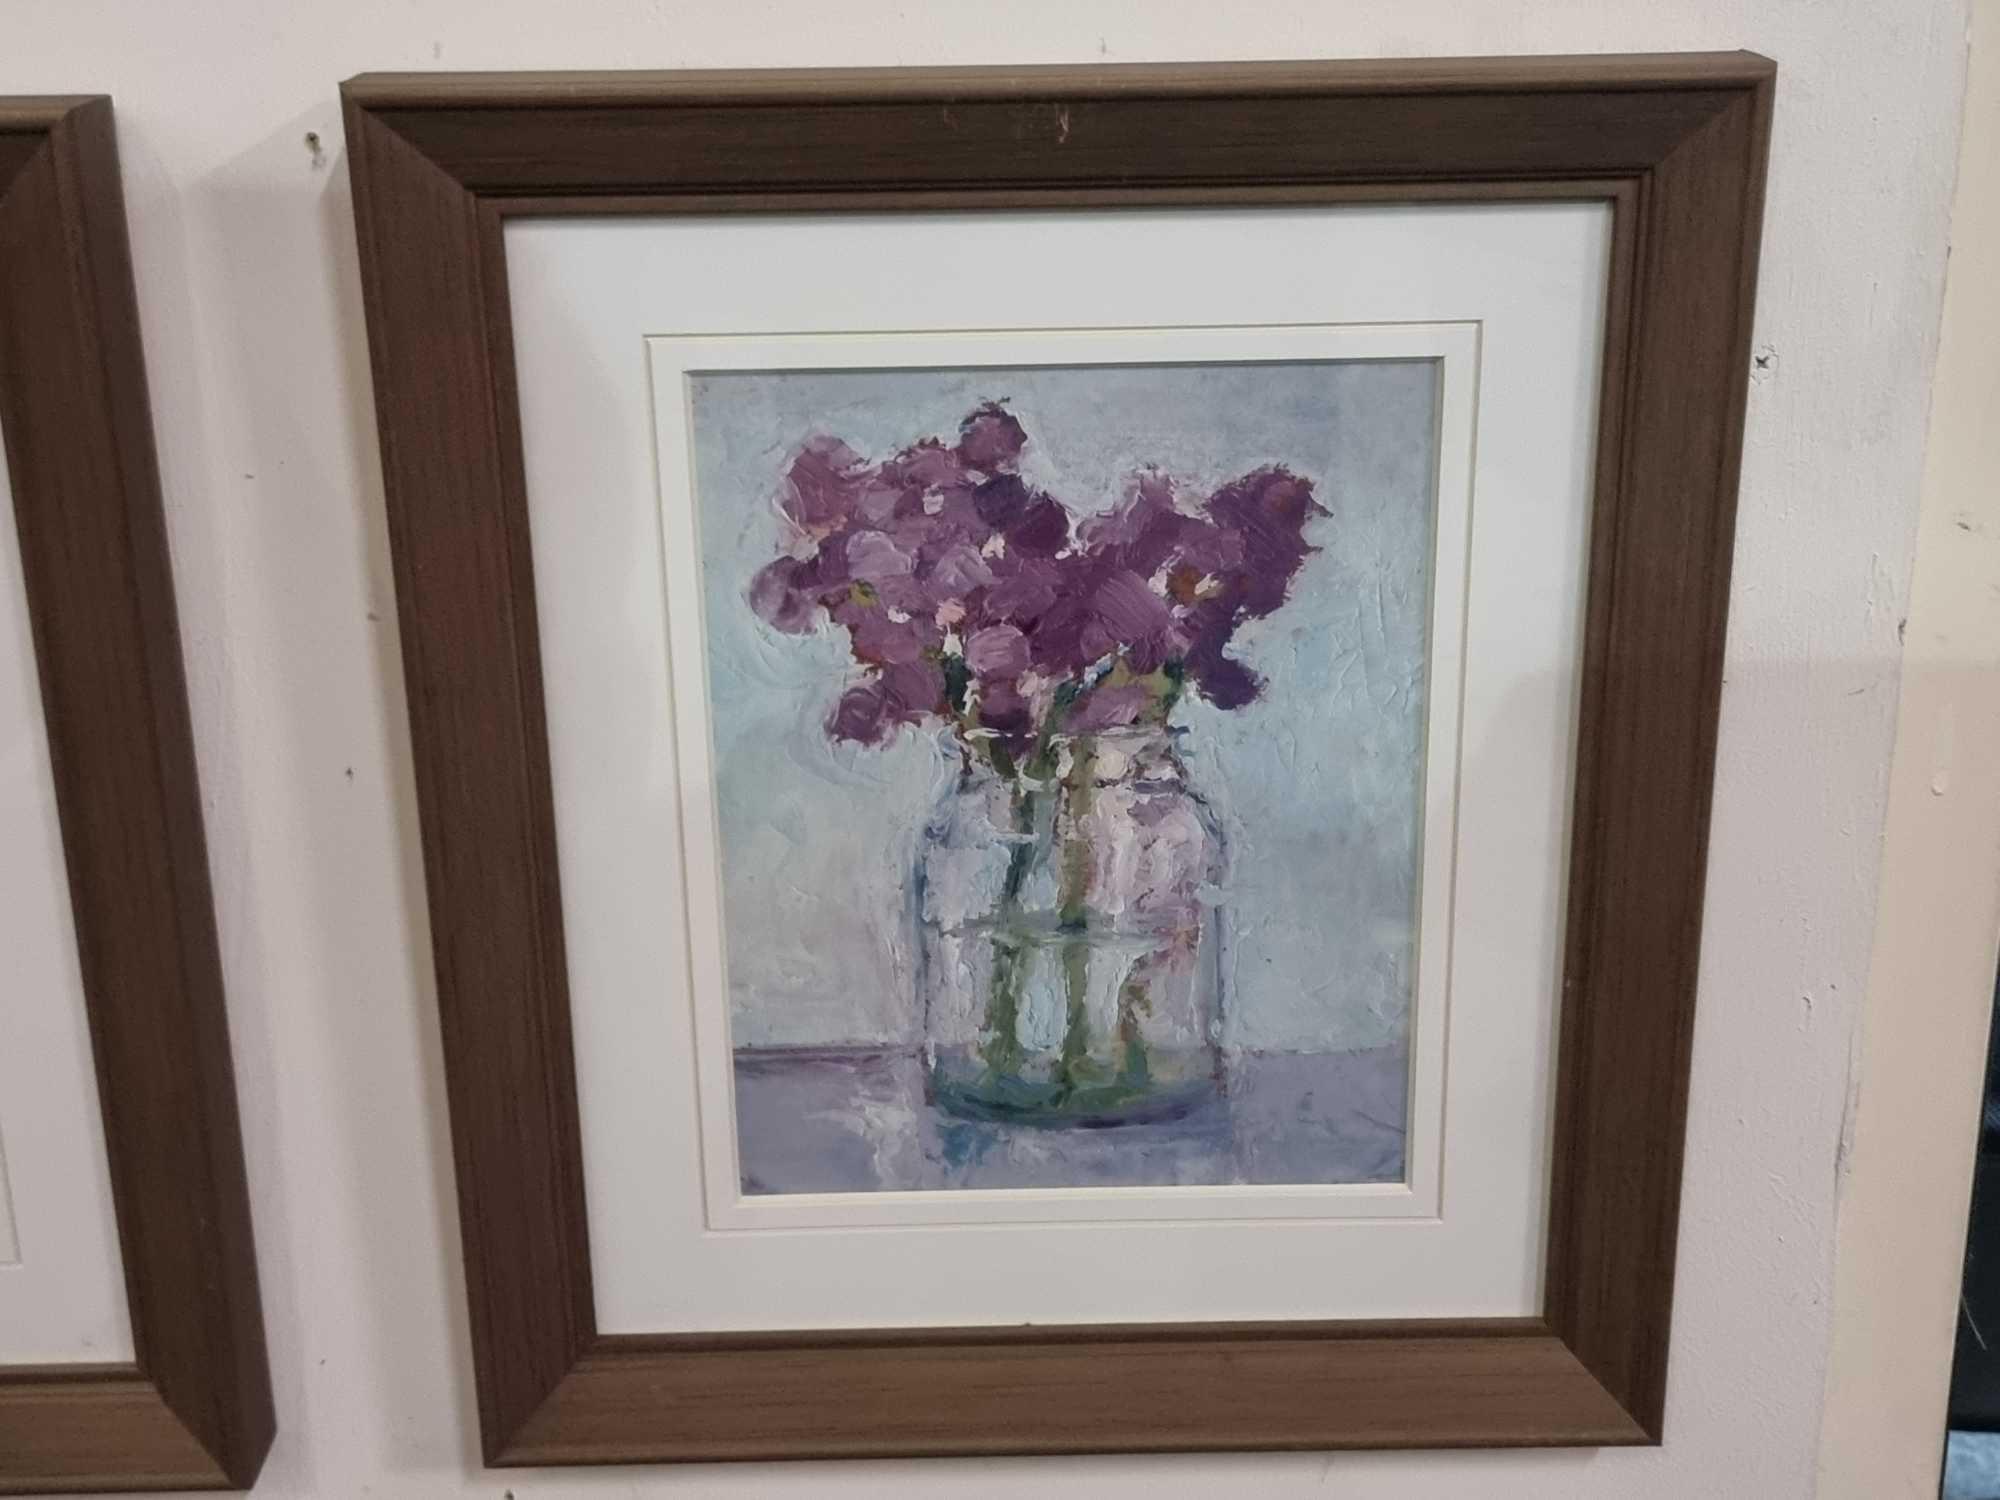 A Set Of Two Prints Depicting Still Life Watercolour Paintings Of Flowers In A Glass Jar In Modern - Image 4 of 4